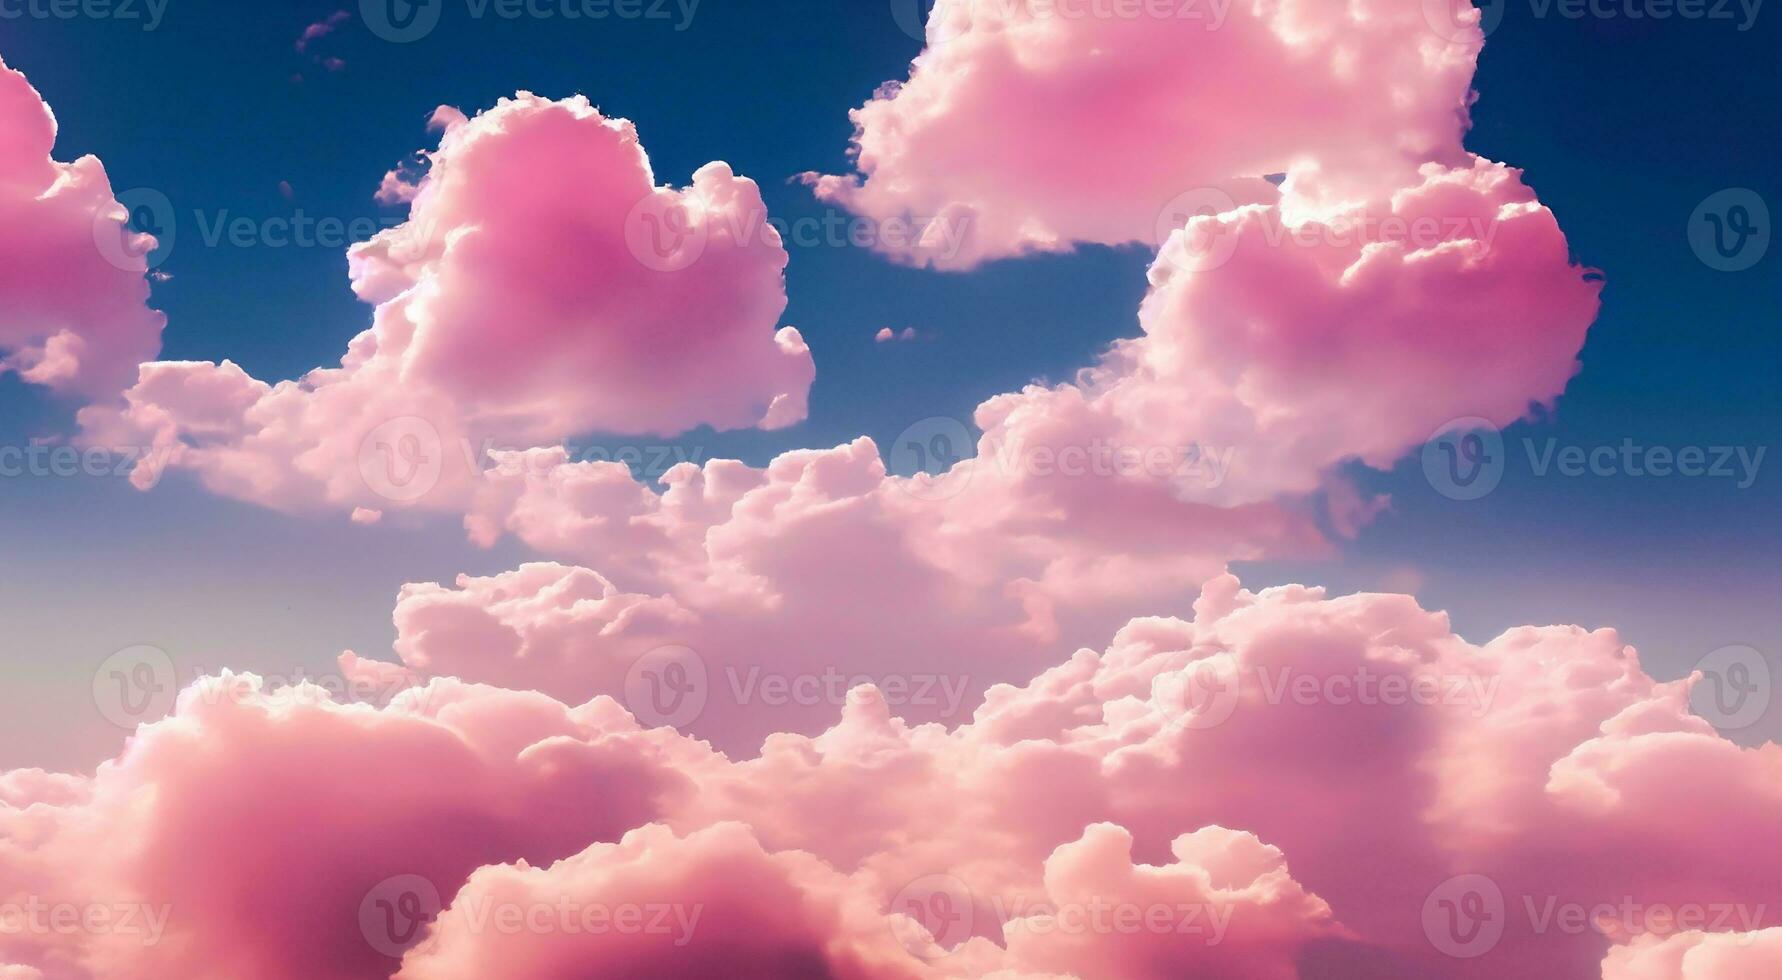 https://static.vecteezy.com/system/resources/previews/027/845/655/non_2x/pink-fluffy-soft-clouds-beautiful-cloudy-sky-dream-cloud-of-heaven-nature-background-or-backdrop-photo.jpg